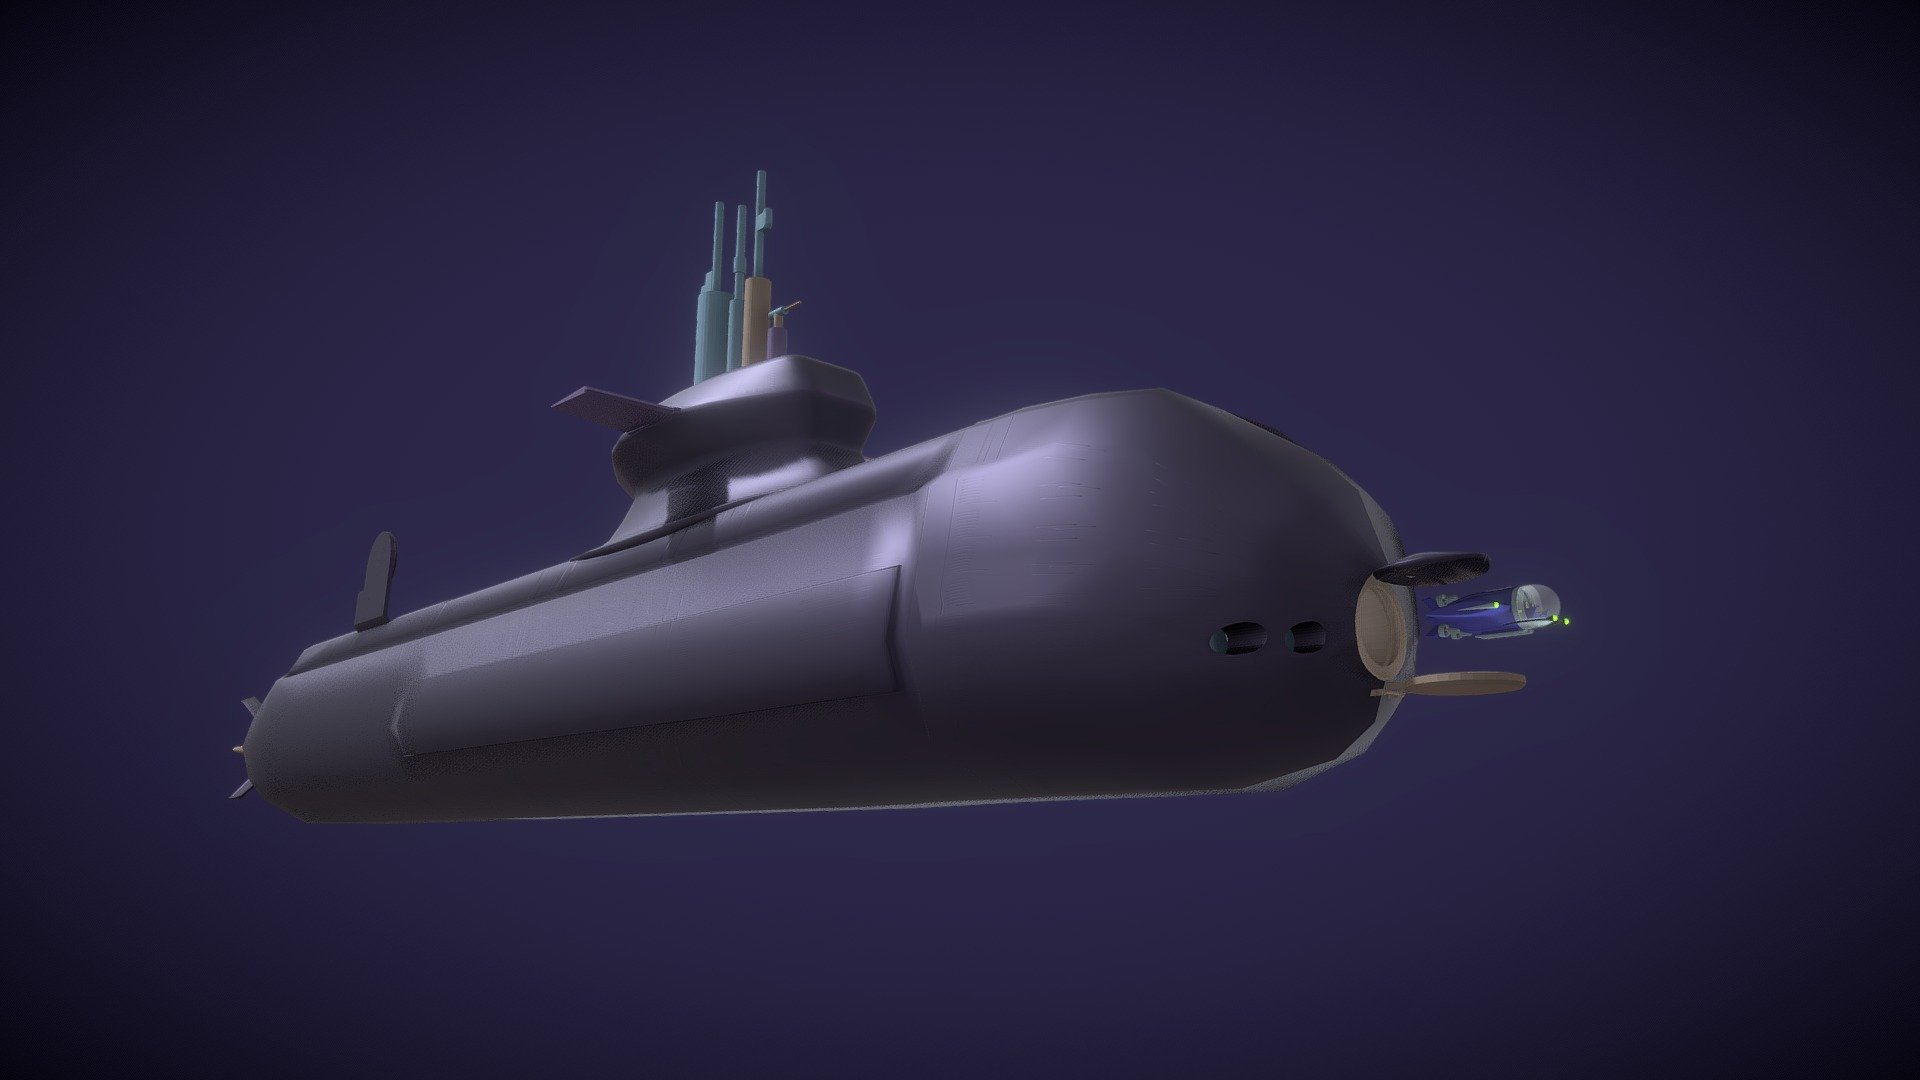 The Blekinge-class submarine is the next generation of submarines developed by Kockums for the Swedish Navy,also known as the A26 type.

First planned at the beginning of the 1990s, the project was called &ldquo;U-båt 2000